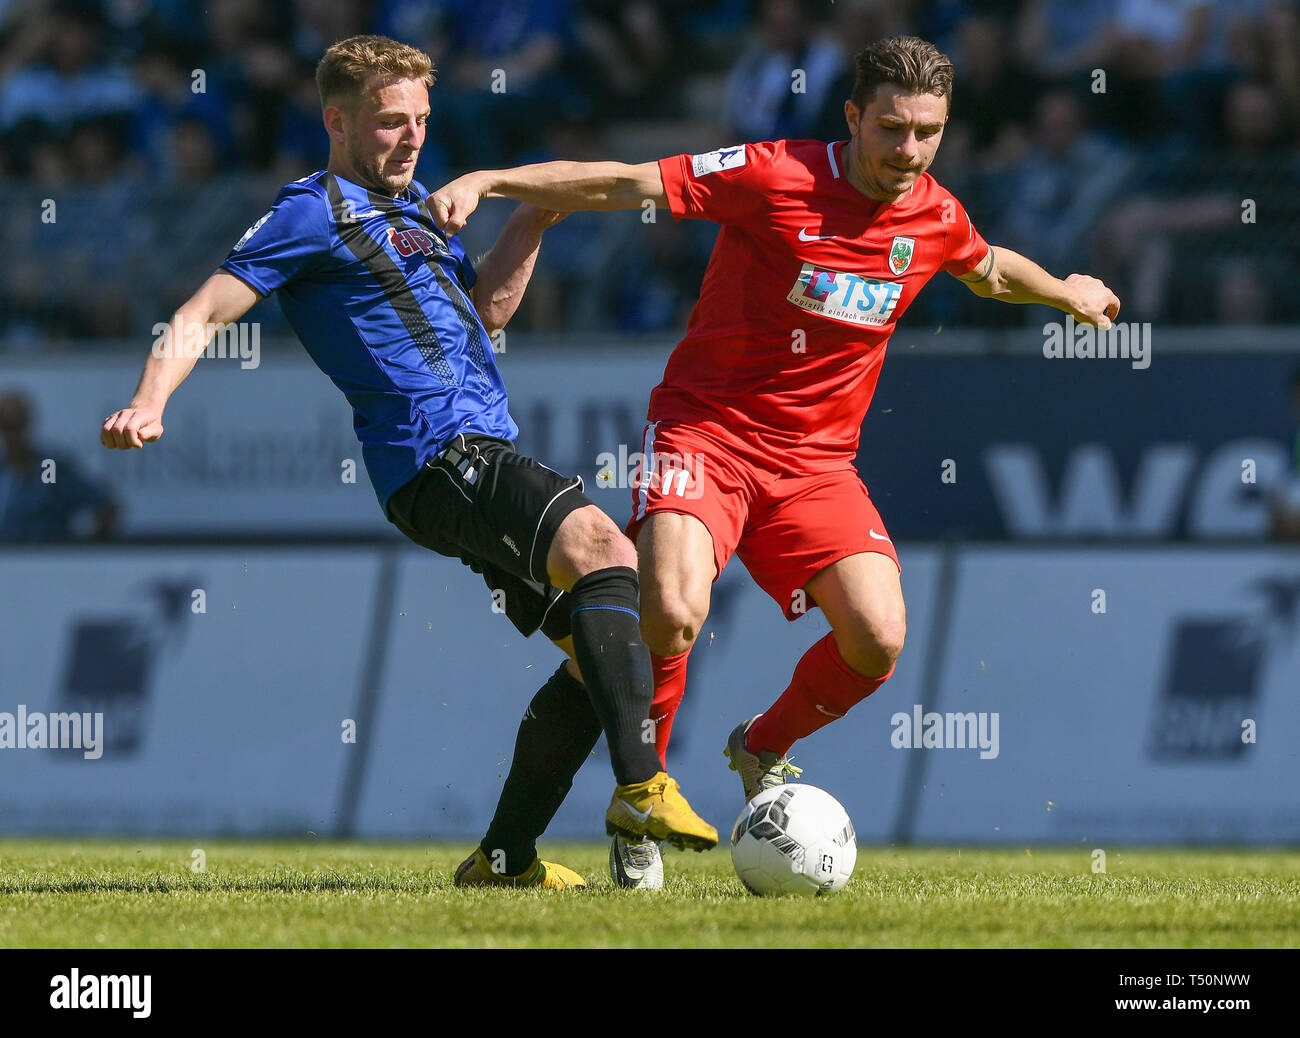 Mannheim, Germany. 20th Apr, 2019. Soccer: Regionalliga Südwest, SV Waldhof  Mannheim - Wormatia Worms, 30th matchday in the Carl-Benz Stadium. Timo  Kern (l) of Mannheim in duel with Giuseppe Burgio of Worms.